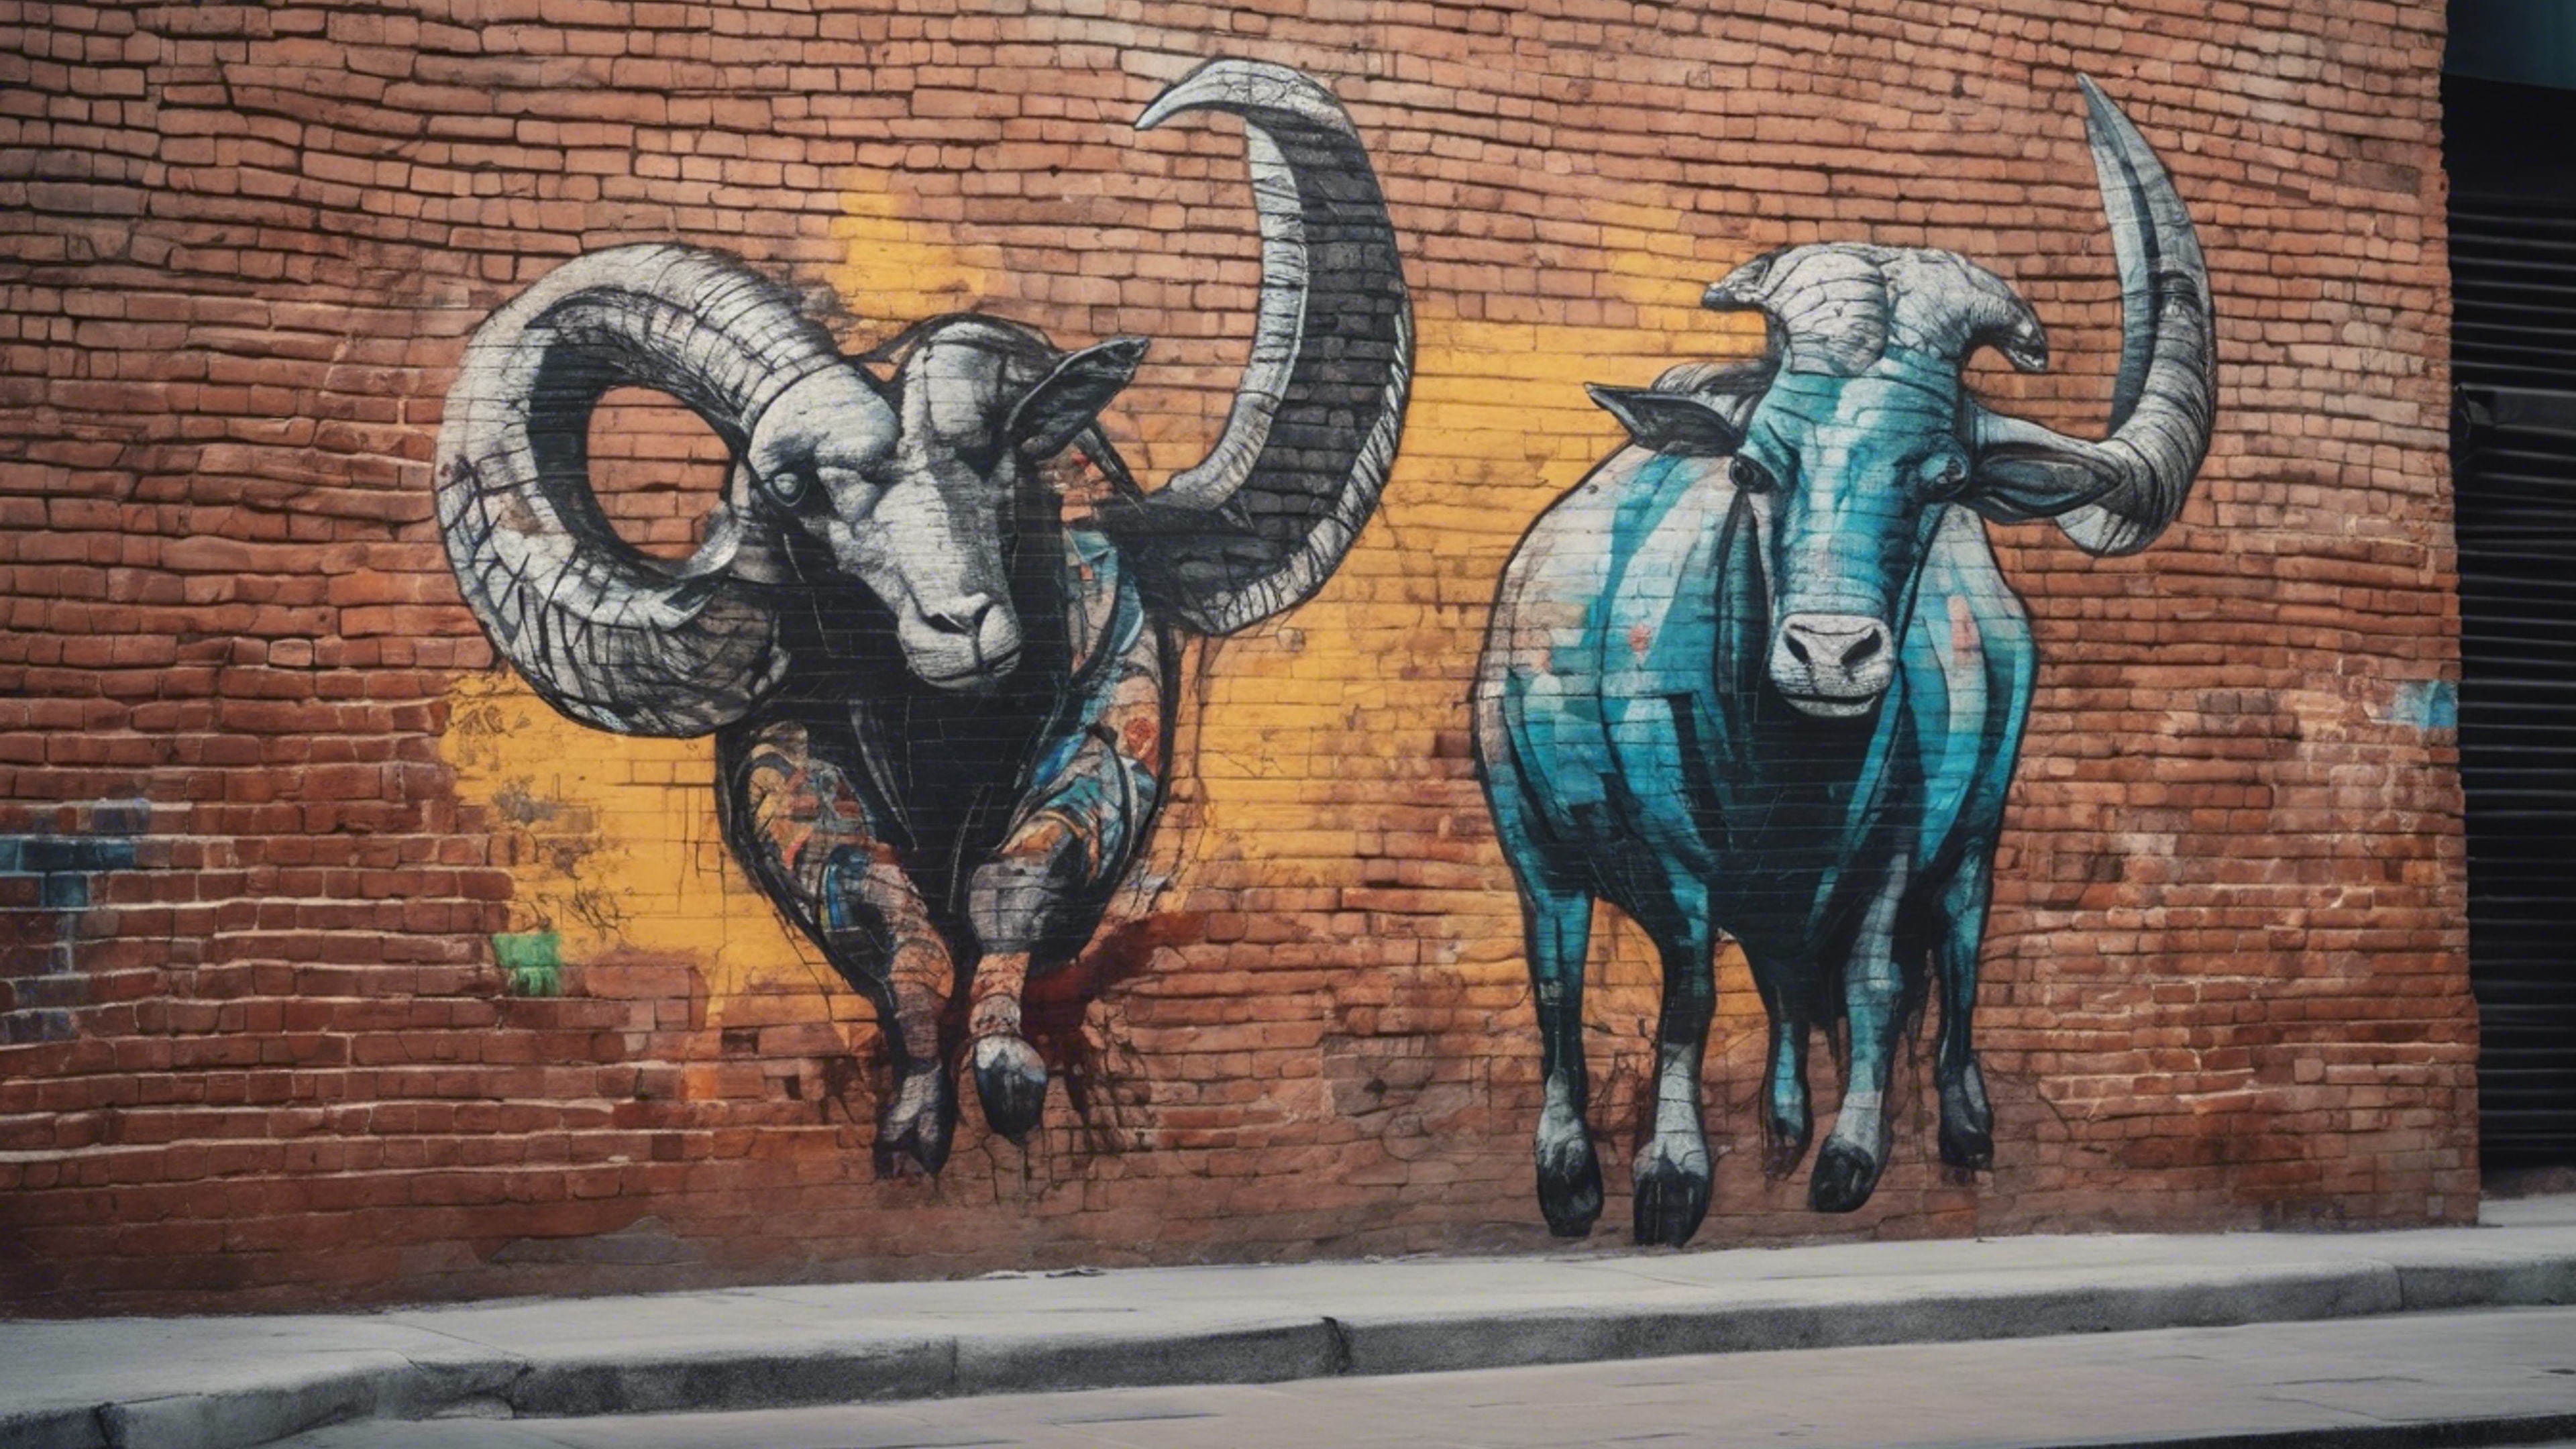 A Capricorn painted as street art on a brick wall in a busy city street. Tapeta[8124c45194ee4830b5c7]